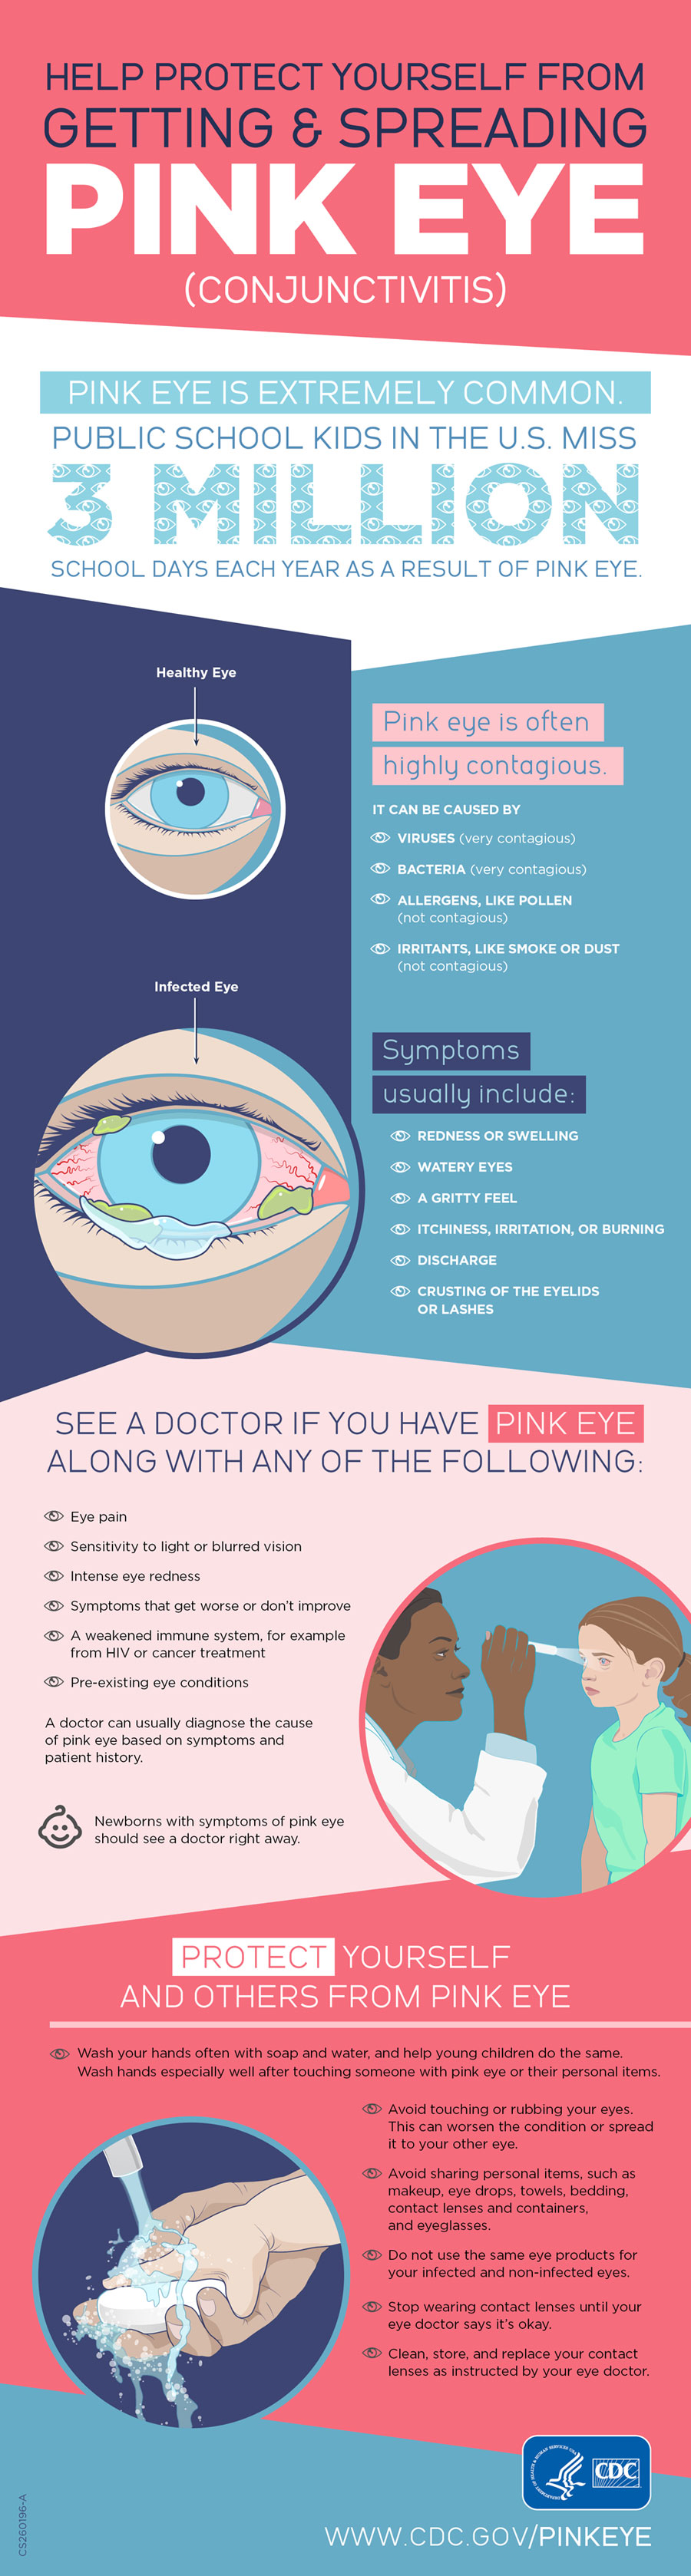 Can you be immune to pink eye?